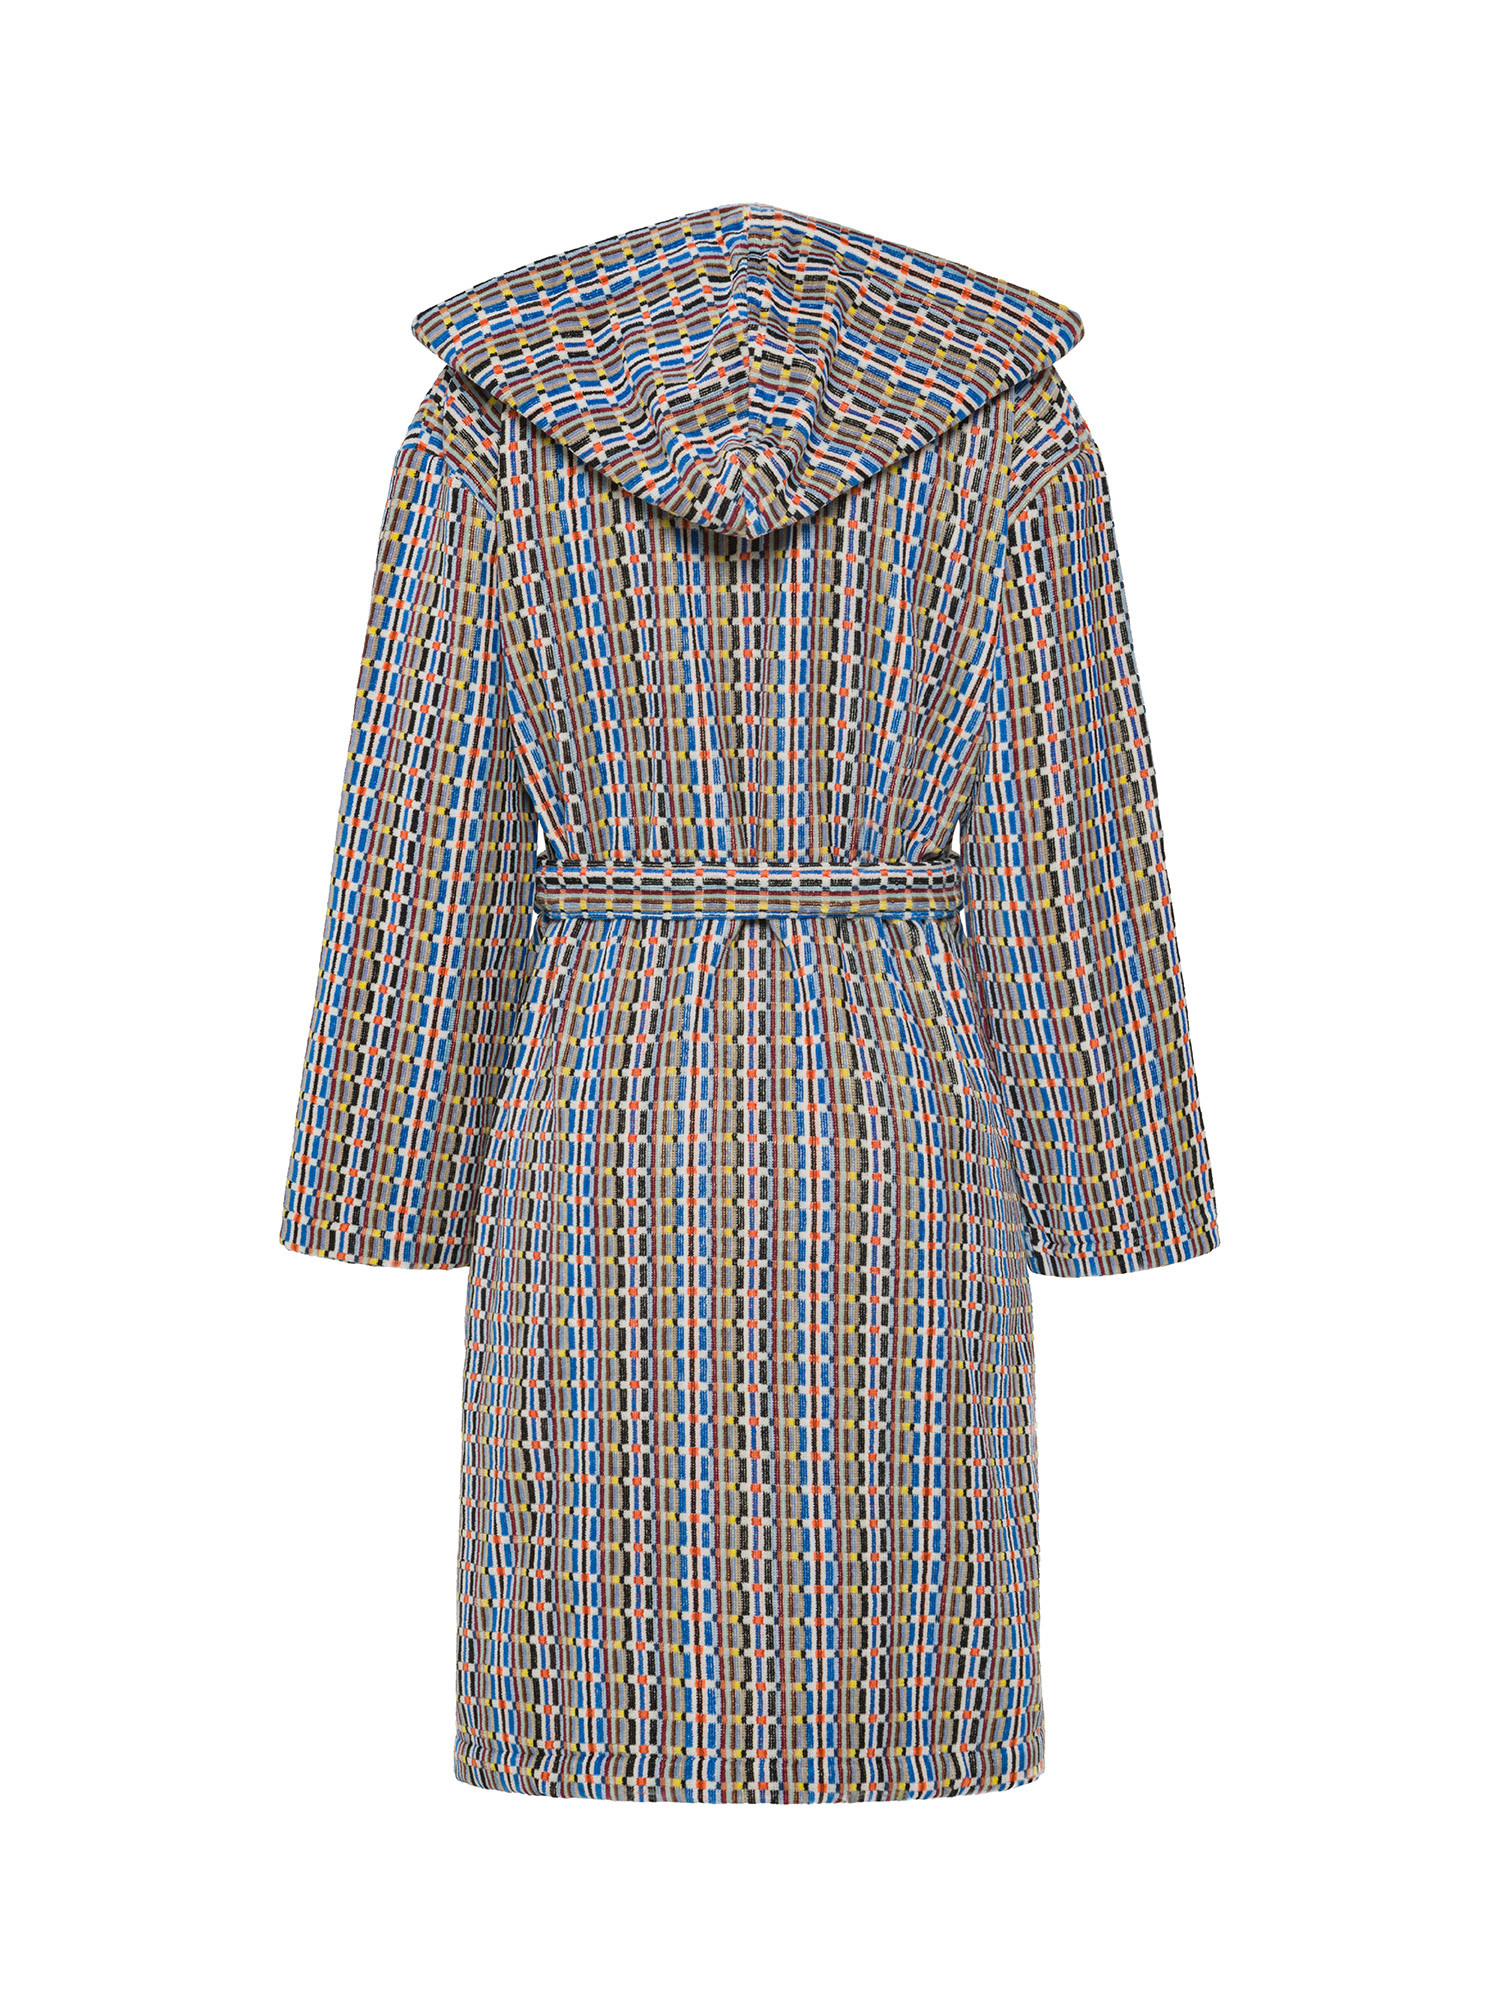 Geometric pattern cotton terry bathrobe, Multicolor, large image number 1